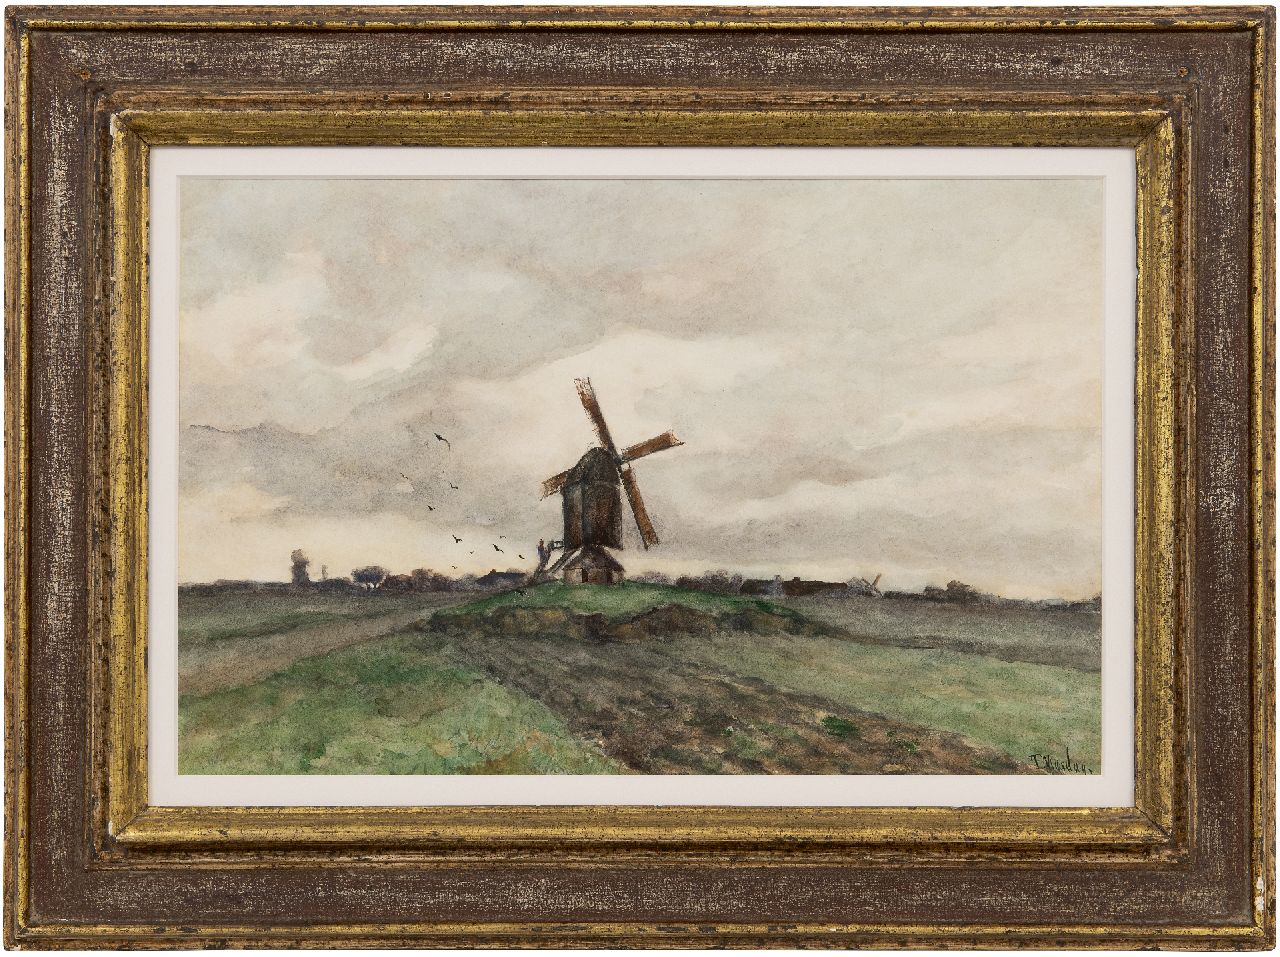 Mesdag T.  | Taco Mesdag | Watercolours and drawings offered for sale | Windmilll in Drenthe, watercolour on paper 35.5 x 52.0 cm, signed l.r.